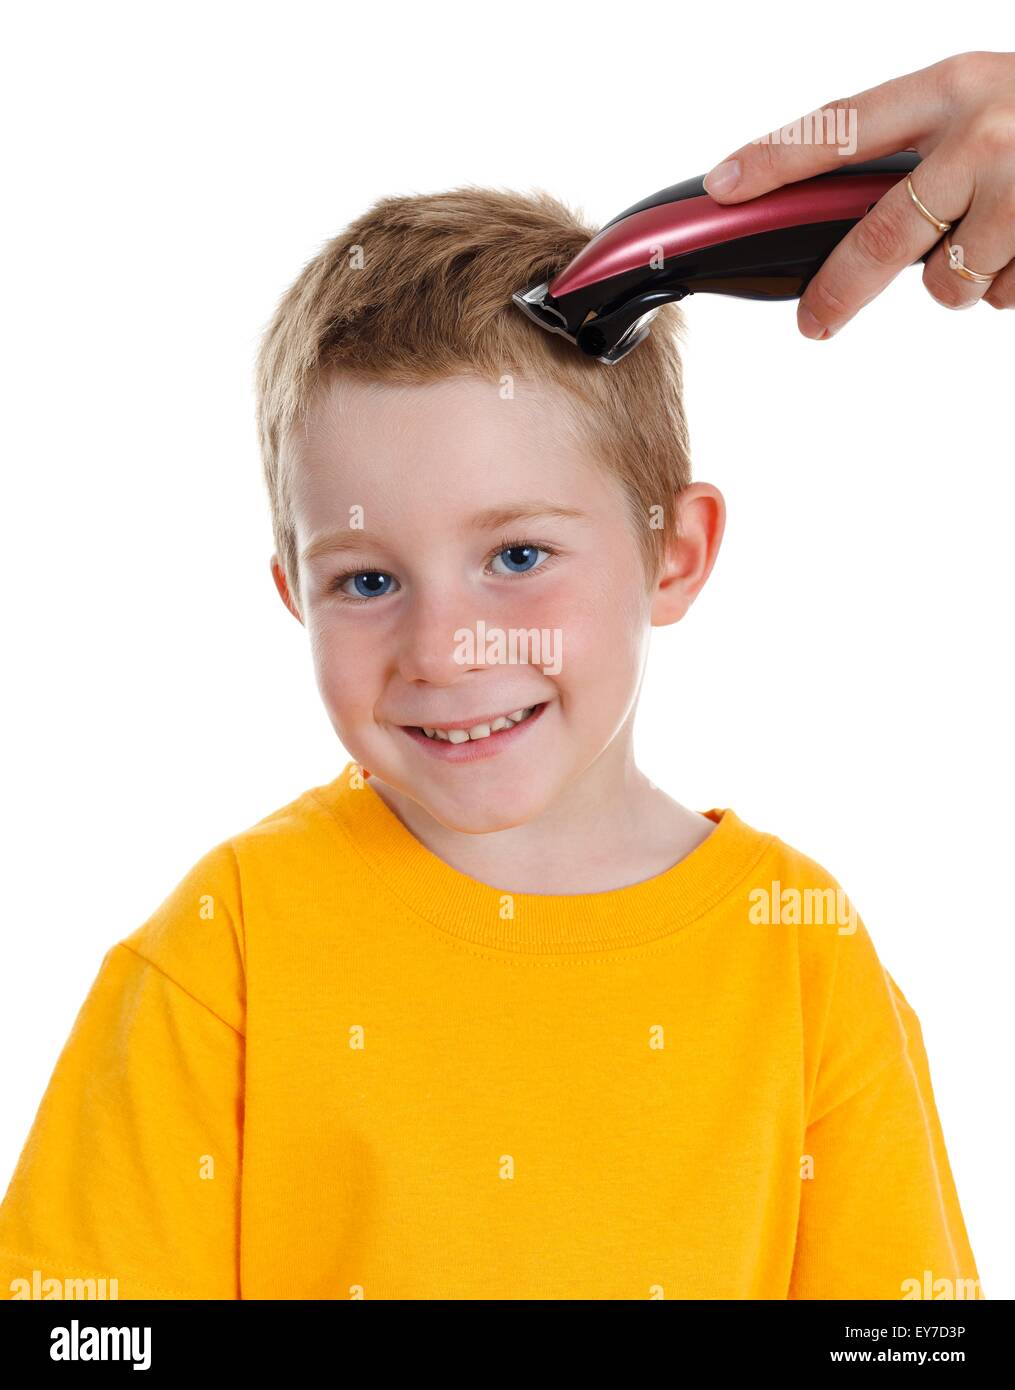 how to cut boy hair with machine